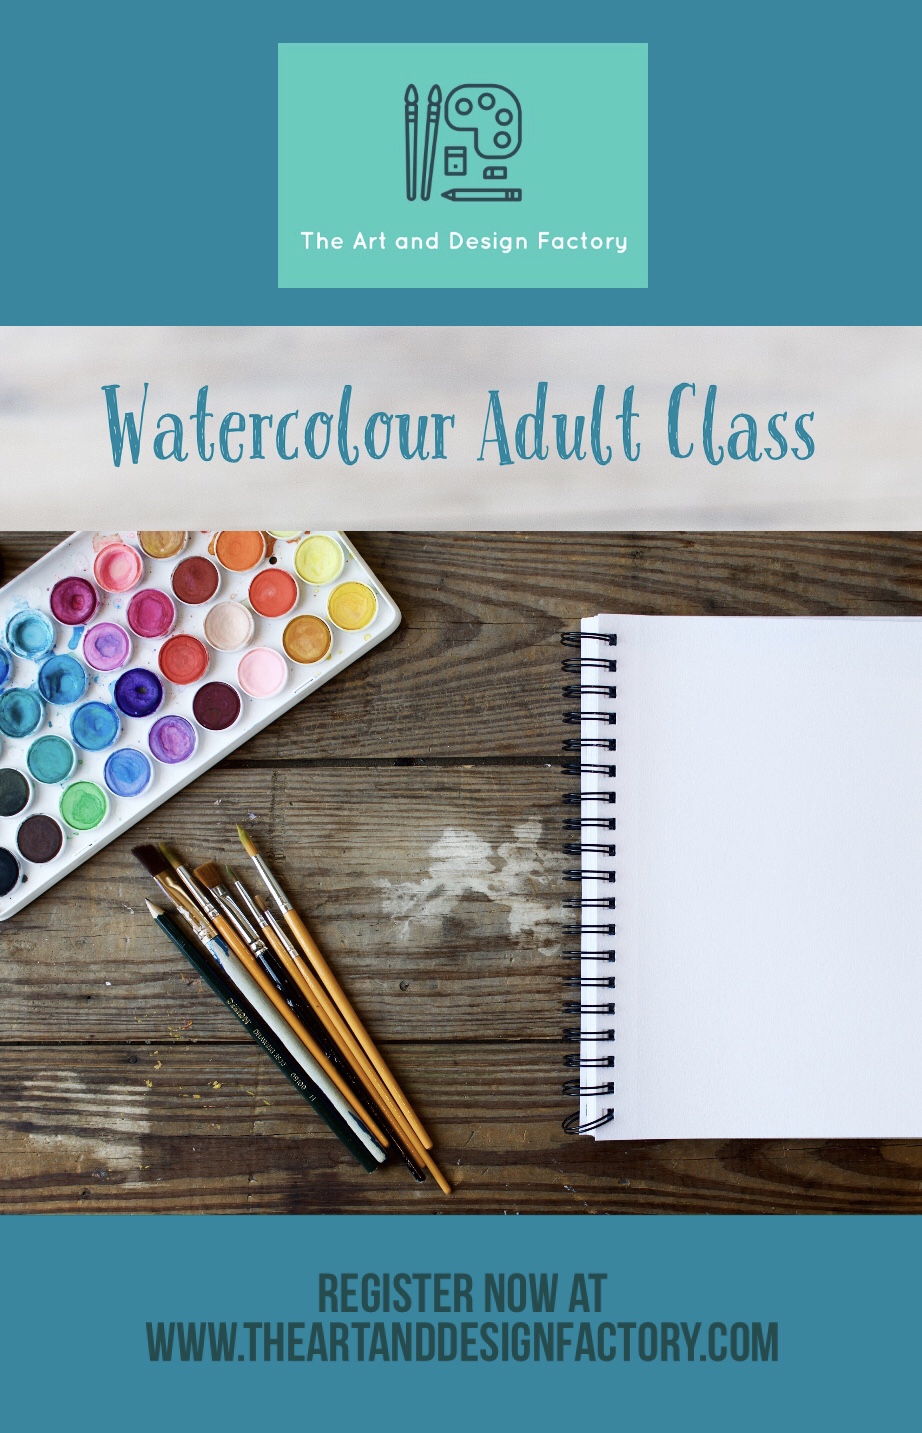 Online Watercolour Adult Class Delivered By Sinead Campbell of The Art And Design Factory